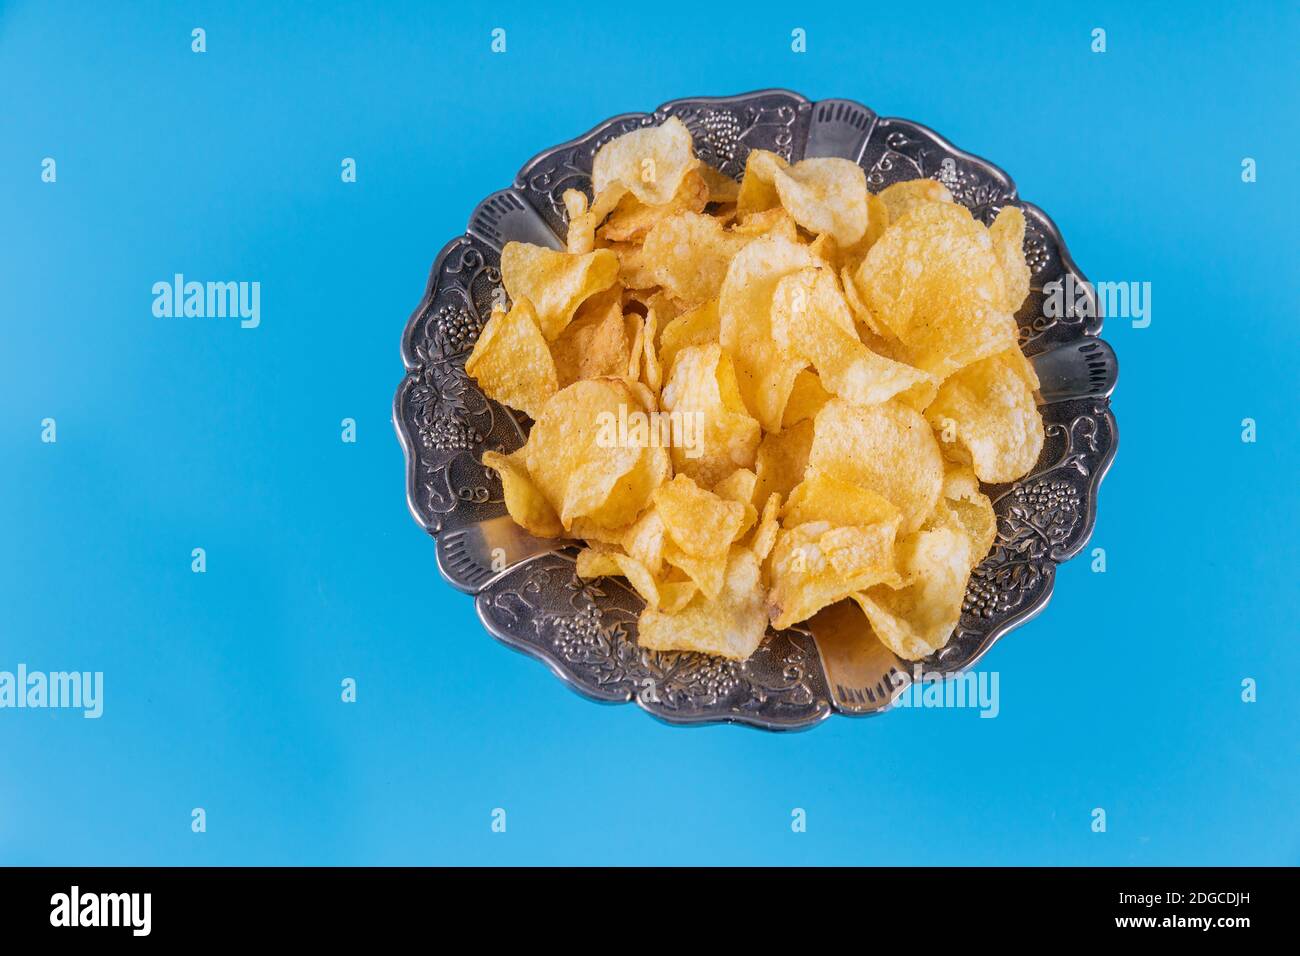 Crispy potato chips in a silver bowl on blue background. Stock Photo